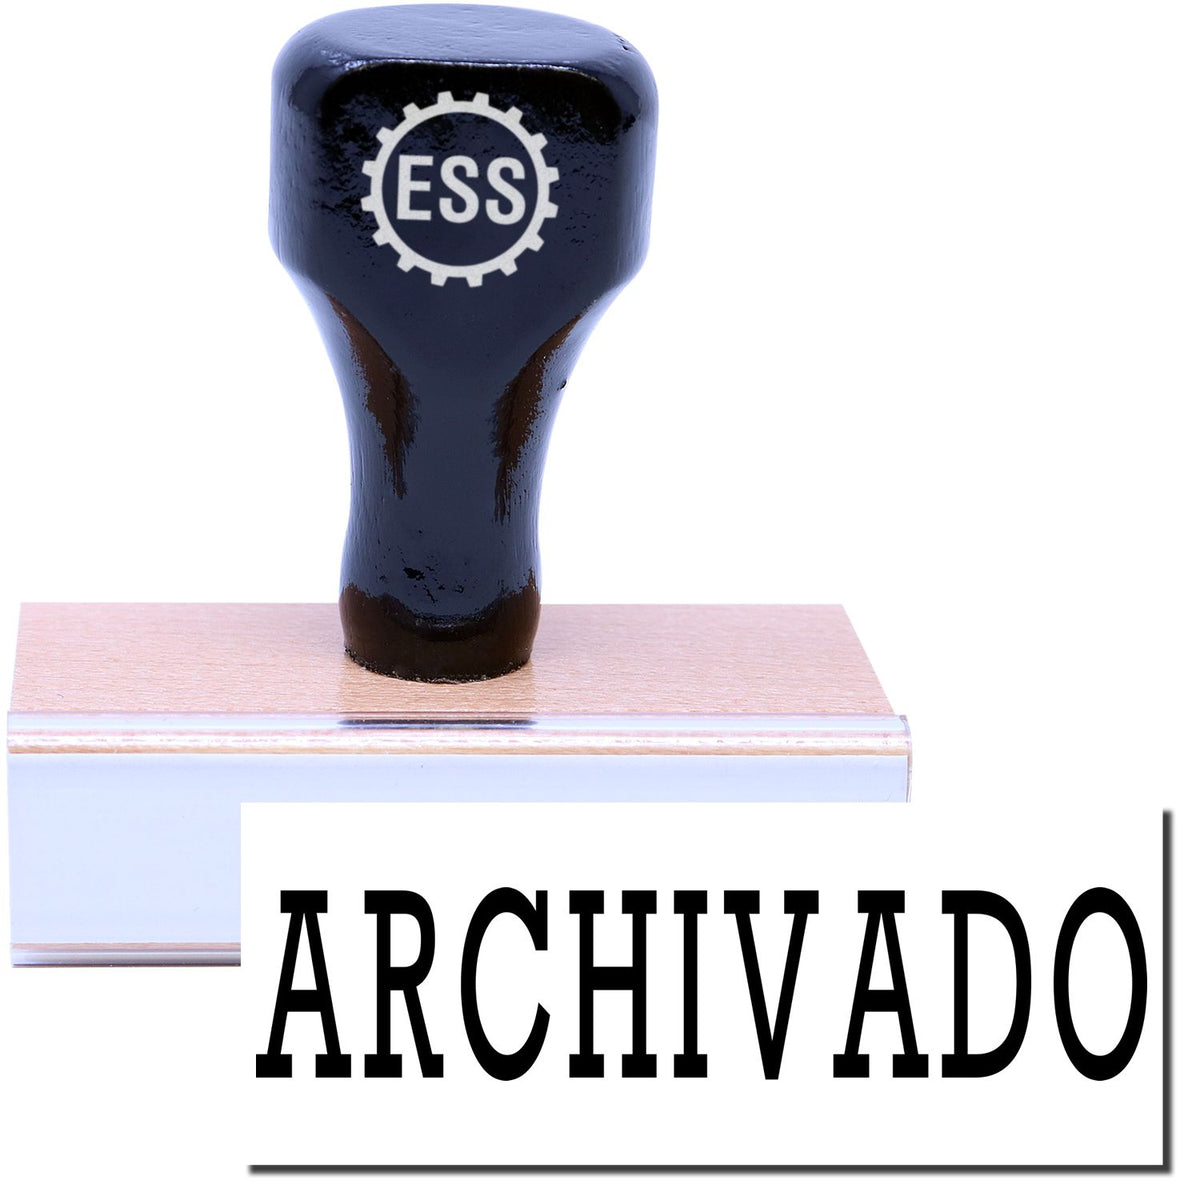 A stock office rubber stamp with a stamped image showing how the text &quot;ARCHIVADO&quot; in a large font is displayed after stamping.